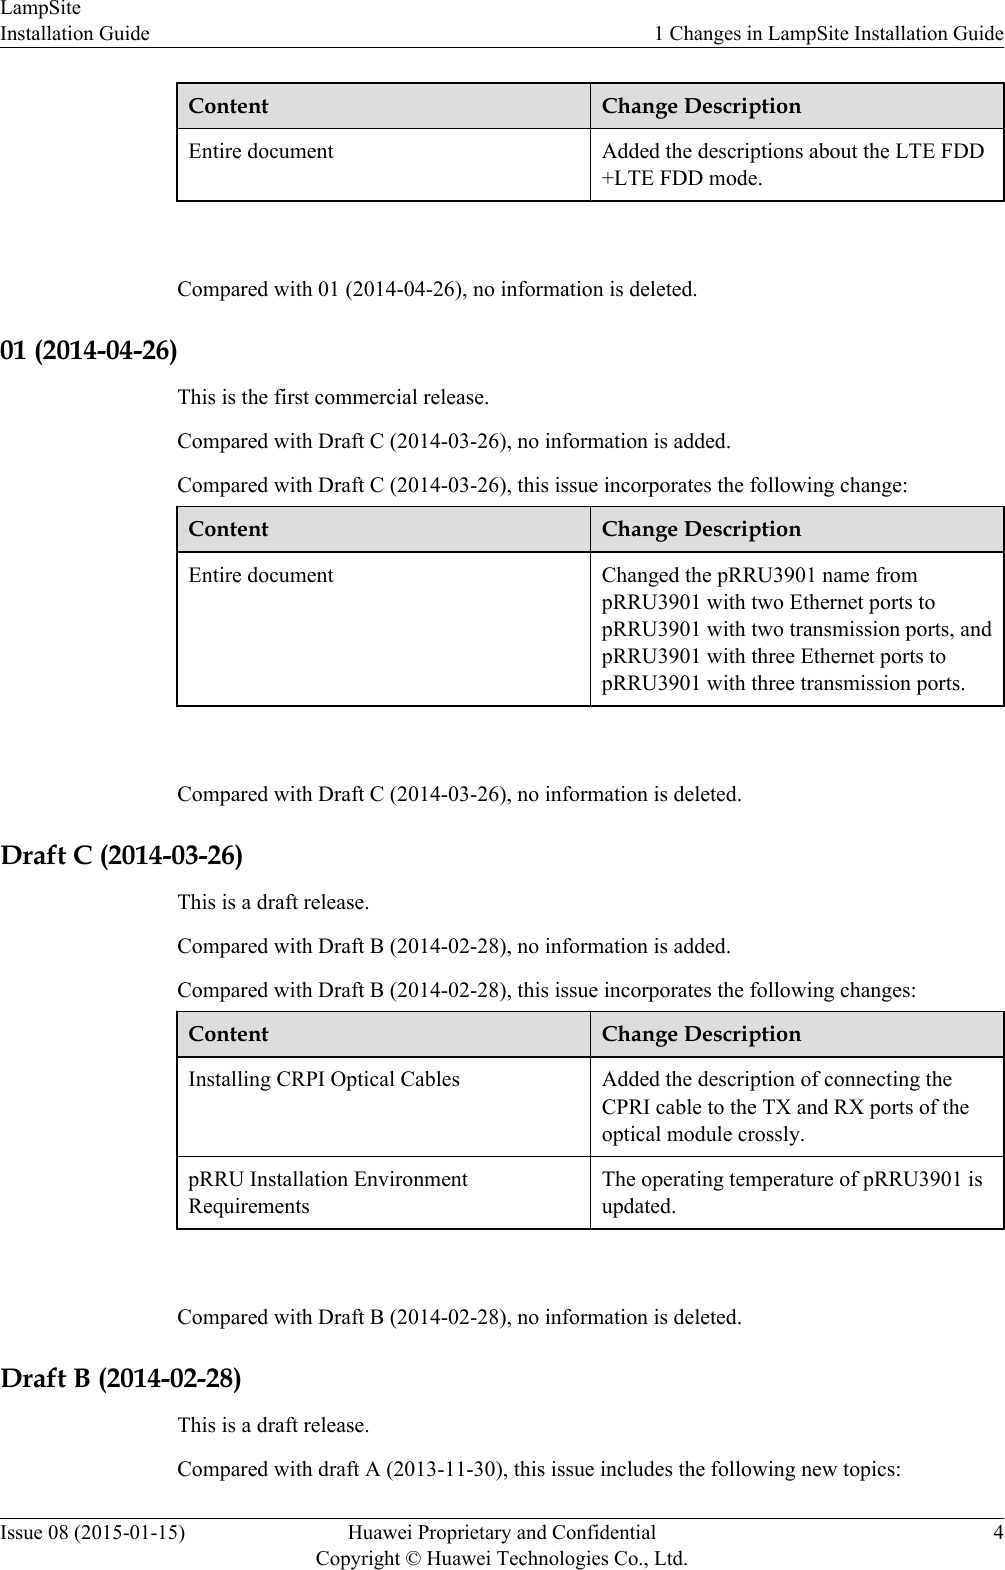 Content Change DescriptionEntire document Added the descriptions about the LTE FDD+LTE FDD mode. Compared with 01 (2014-04-26), no information is deleted.01 (2014-04-26)This is the first commercial release.Compared with Draft C (2014-03-26), no information is added.Compared with Draft C (2014-03-26), this issue incorporates the following change:Content Change DescriptionEntire document Changed the pRRU3901 name frompRRU3901 with two Ethernet ports topRRU3901 with two transmission ports, andpRRU3901 with three Ethernet ports topRRU3901 with three transmission ports. Compared with Draft C (2014-03-26), no information is deleted.Draft C (2014-03-26)This is a draft release.Compared with Draft B (2014-02-28), no information is added.Compared with Draft B (2014-02-28), this issue incorporates the following changes:Content Change DescriptionInstalling CRPI Optical Cables Added the description of connecting theCPRI cable to the TX and RX ports of theoptical module crossly.pRRU Installation EnvironmentRequirementsThe operating temperature of pRRU3901 isupdated. Compared with Draft B (2014-02-28), no information is deleted.Draft B (2014-02-28)This is a draft release.Compared with draft A (2013-11-30), this issue includes the following new topics:LampSiteInstallation Guide 1 Changes in LampSite Installation GuideIssue 08 (2015-01-15) Huawei Proprietary and ConfidentialCopyright © Huawei Technologies Co., Ltd.4